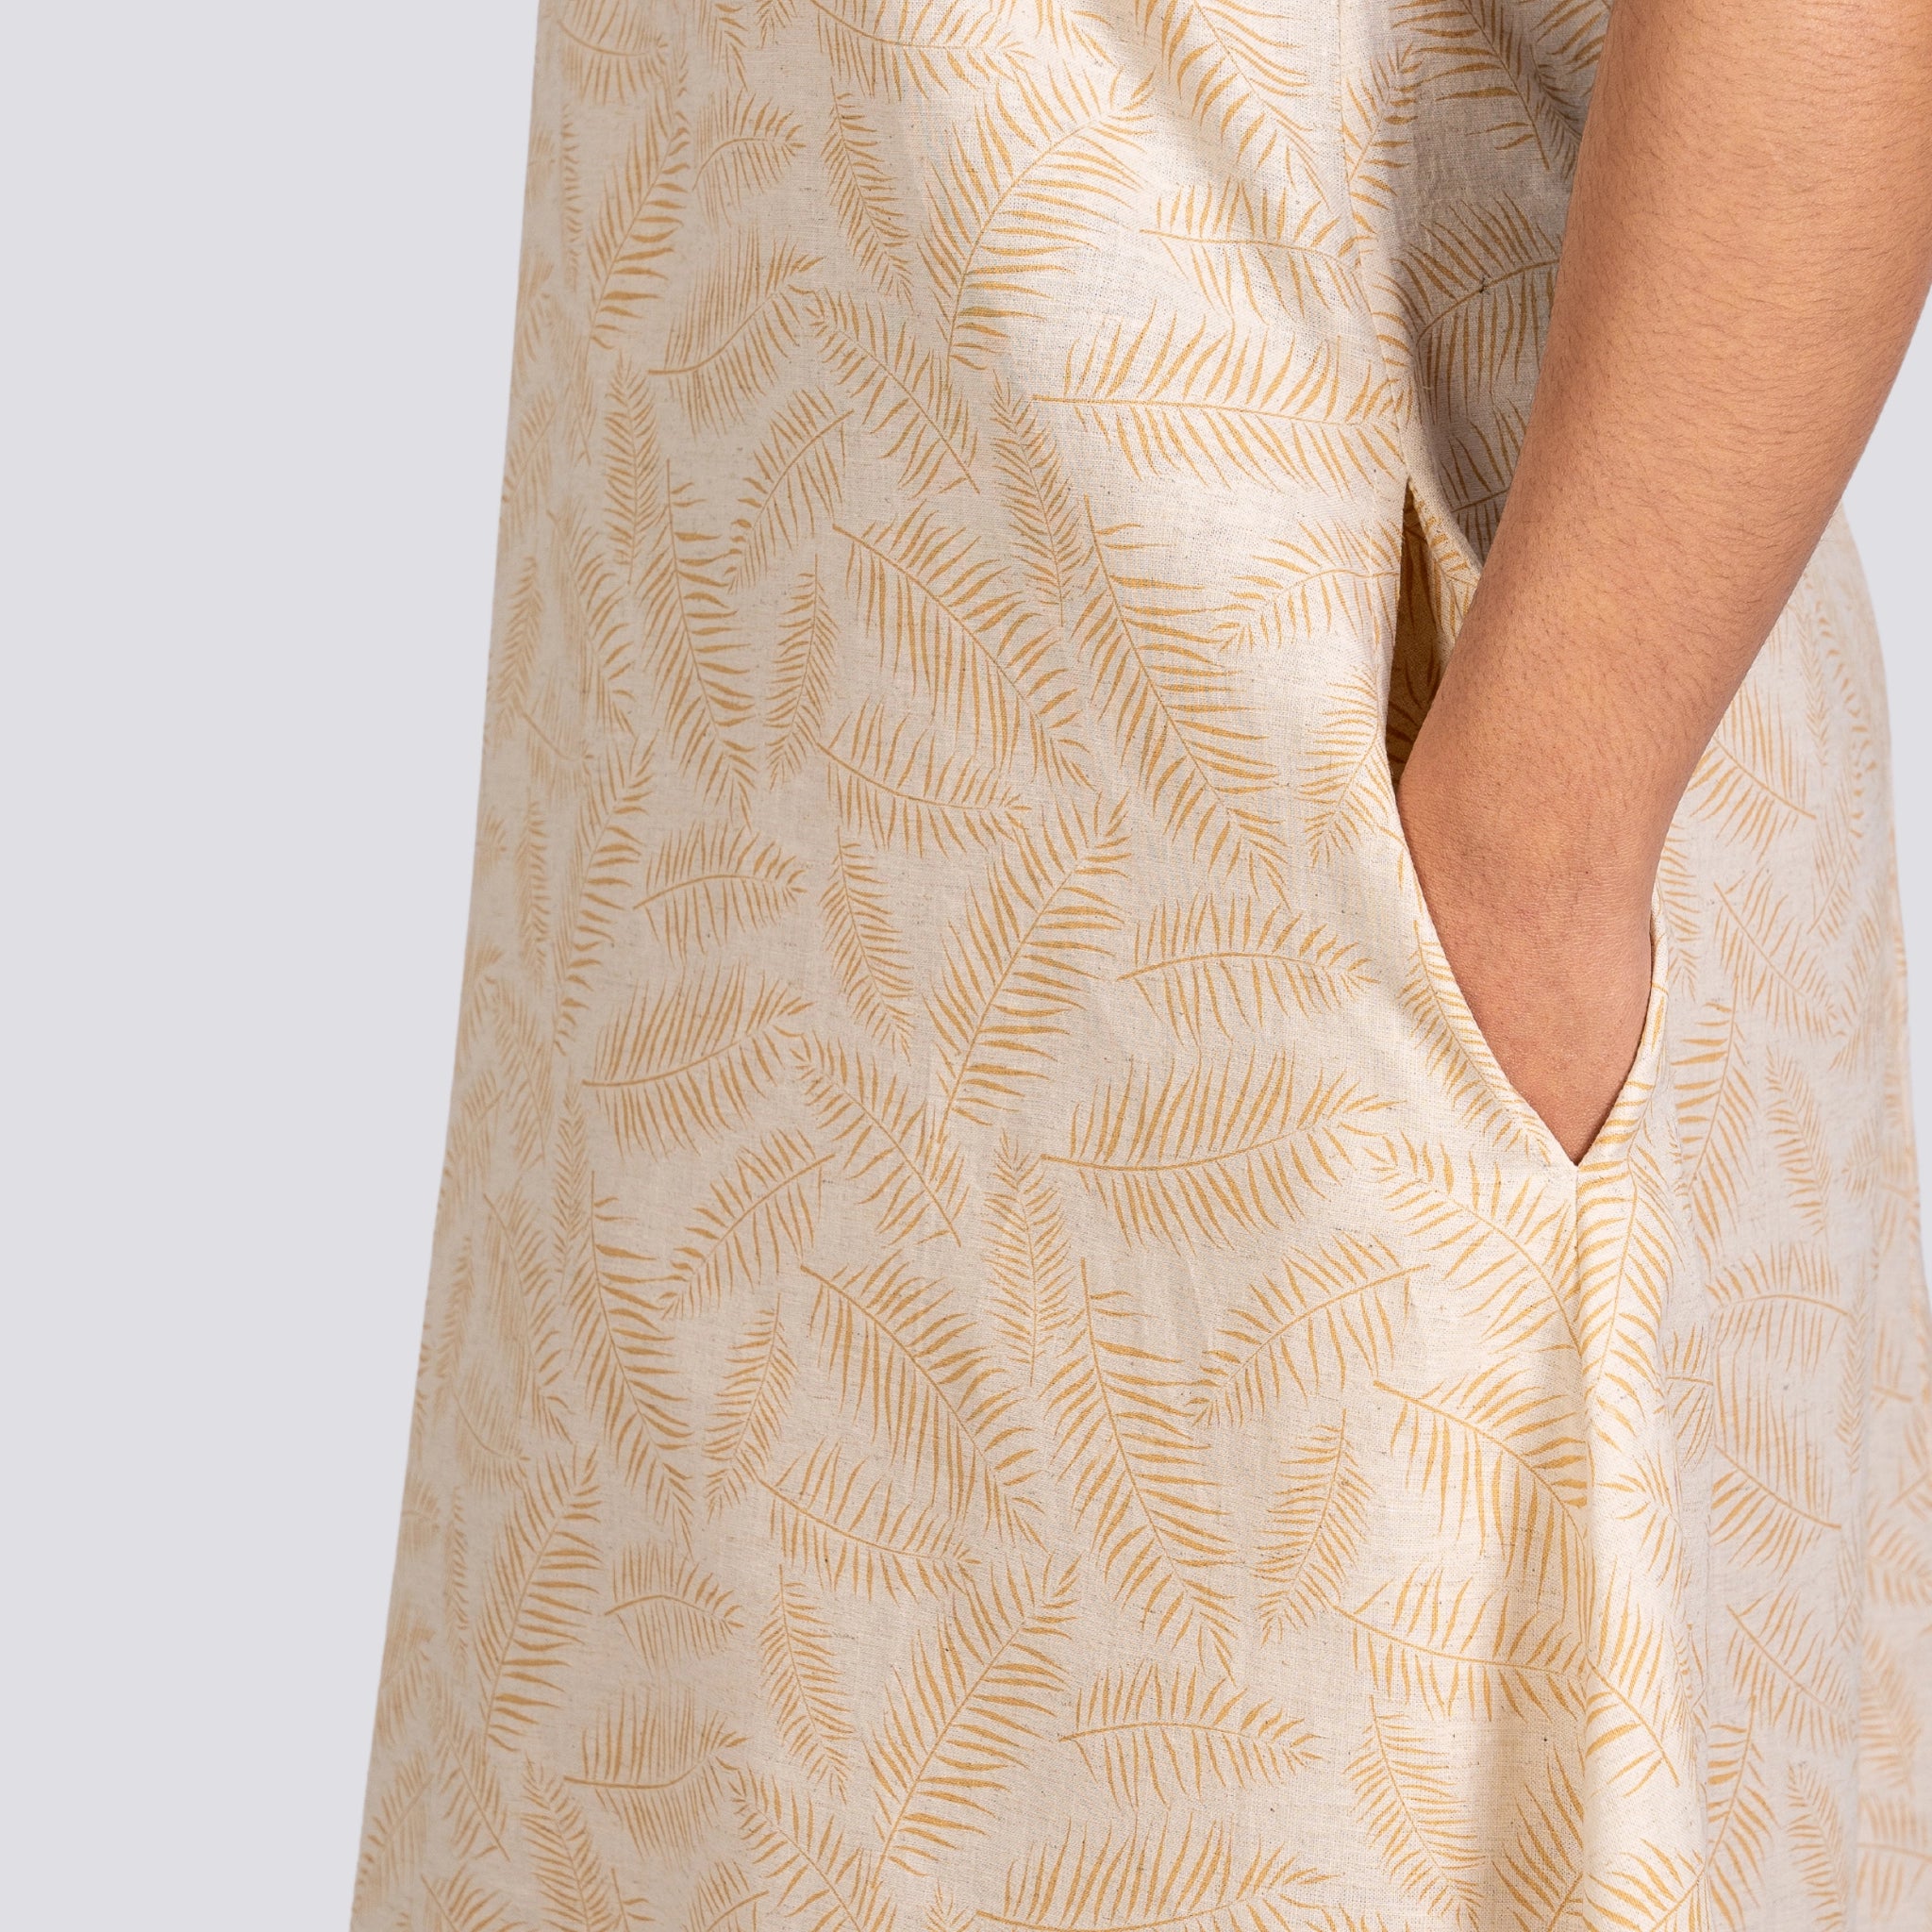 Close-up of a person wearing a beige dress with a Karee Mystic Serenity High Low Linen Cotton Midi Dress, focusing on the side seam and pocket detail.